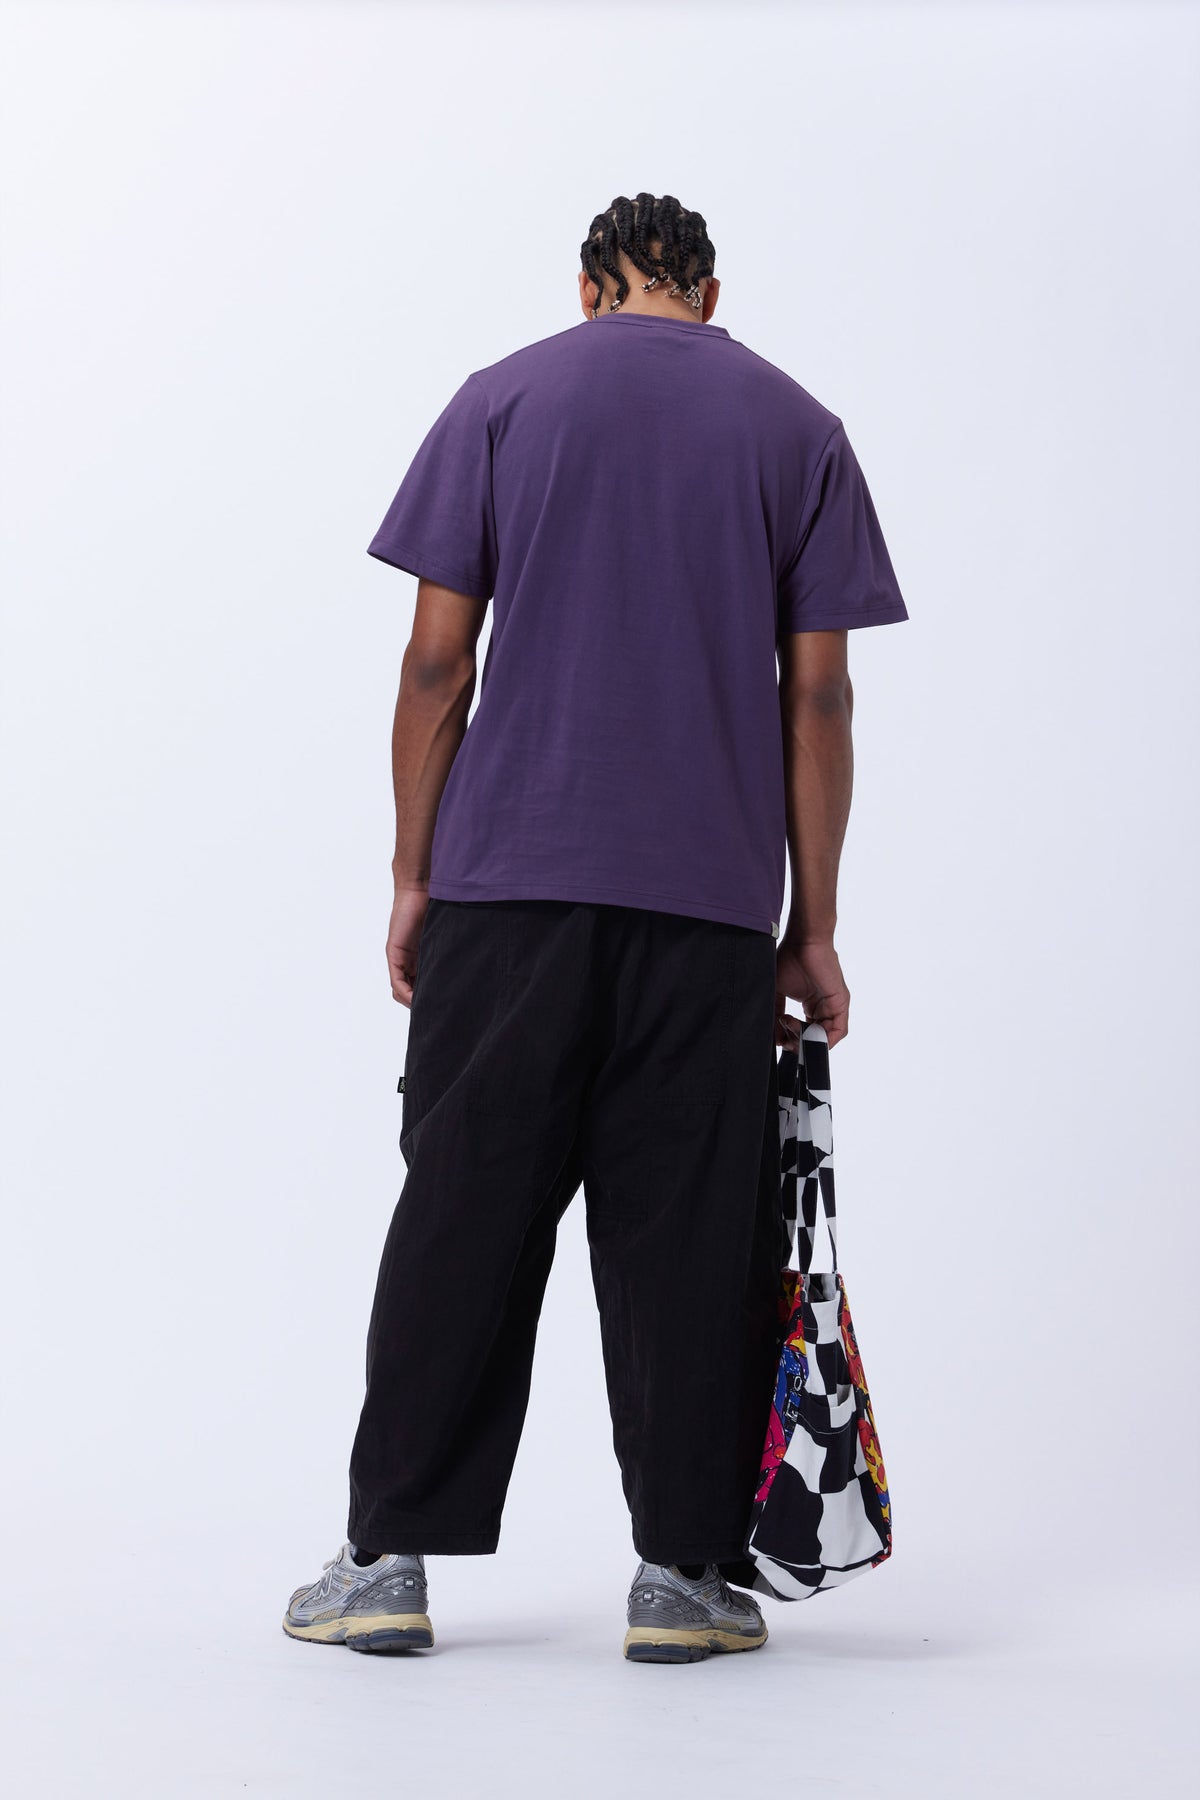 P.A.M. P.World Ecstacy Tee - Mulberry